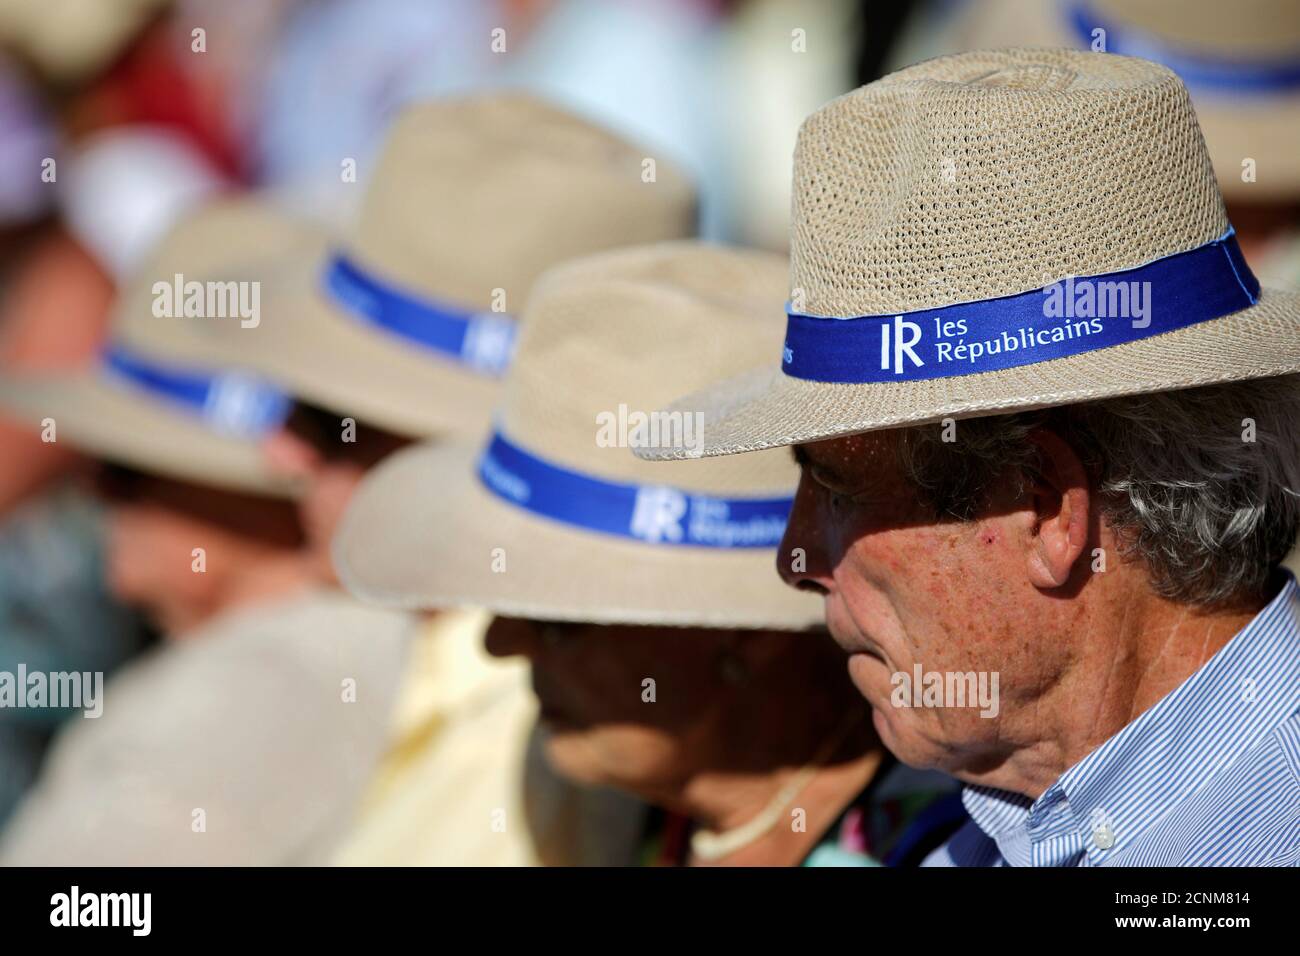 Supporters wear hats with the Les Republicains (LR) political party logo at LR's summer camp in La Baule, France, September 3, 2016. REUTERS/Stephane Mahe Stock Photo